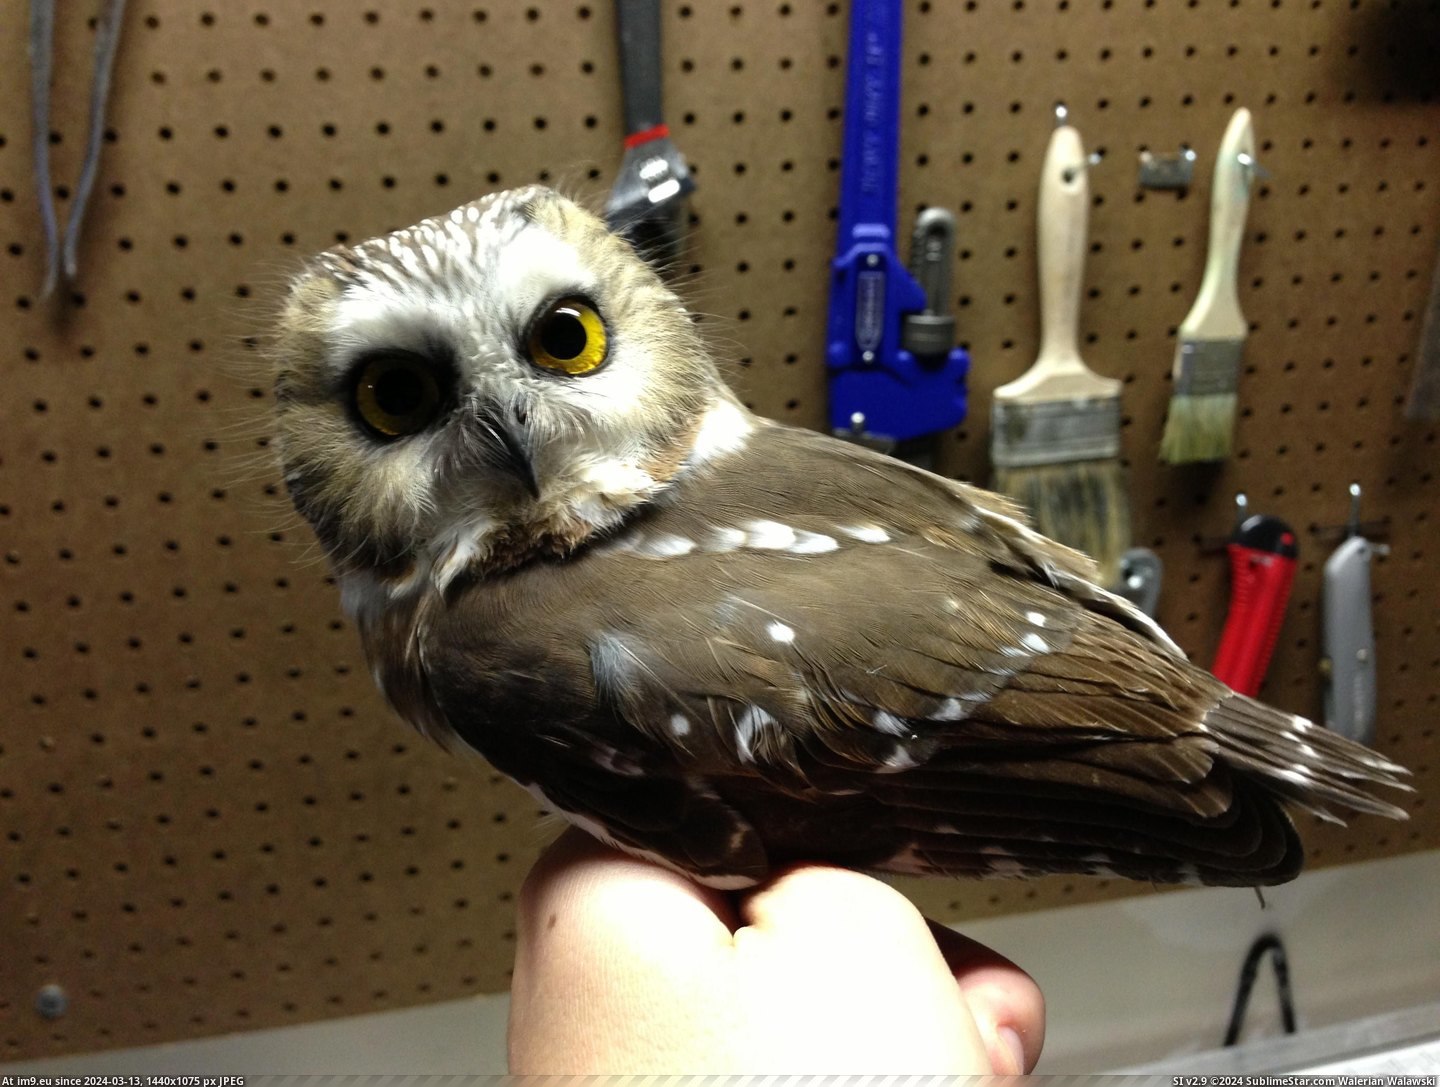 #Photos #Owls #Research #Tiny [Pics] More photos of my research on tiny owls! 16 Pic. (Image of album My r/PICS favs))